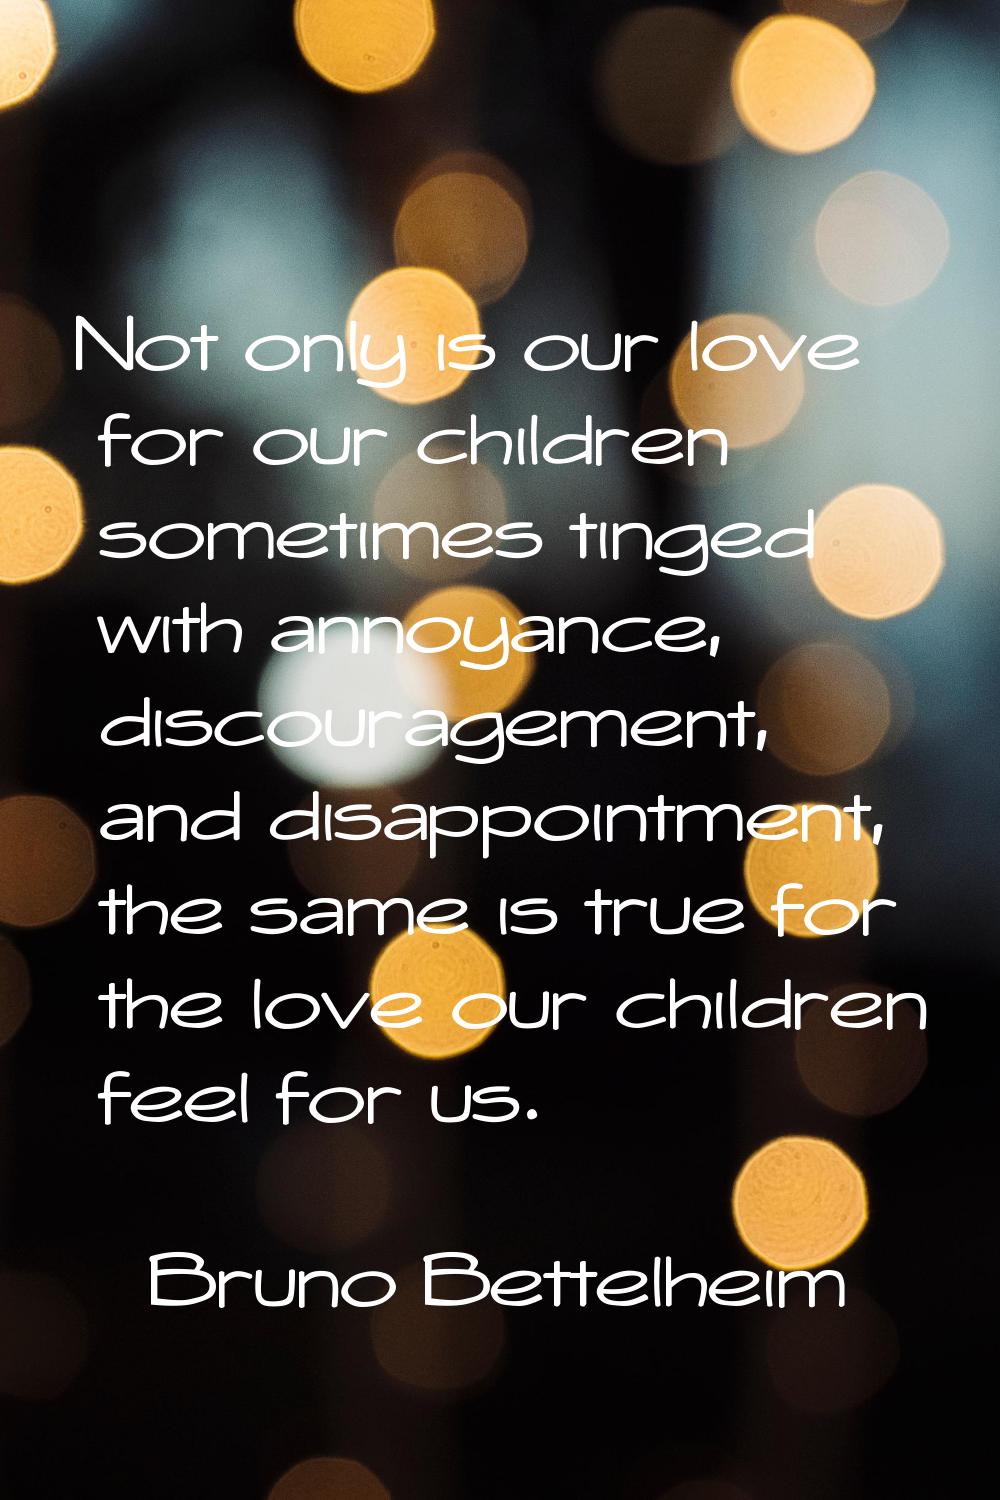 Not only is our love for our children sometimes tinged with annoyance, discouragement, and disappoi